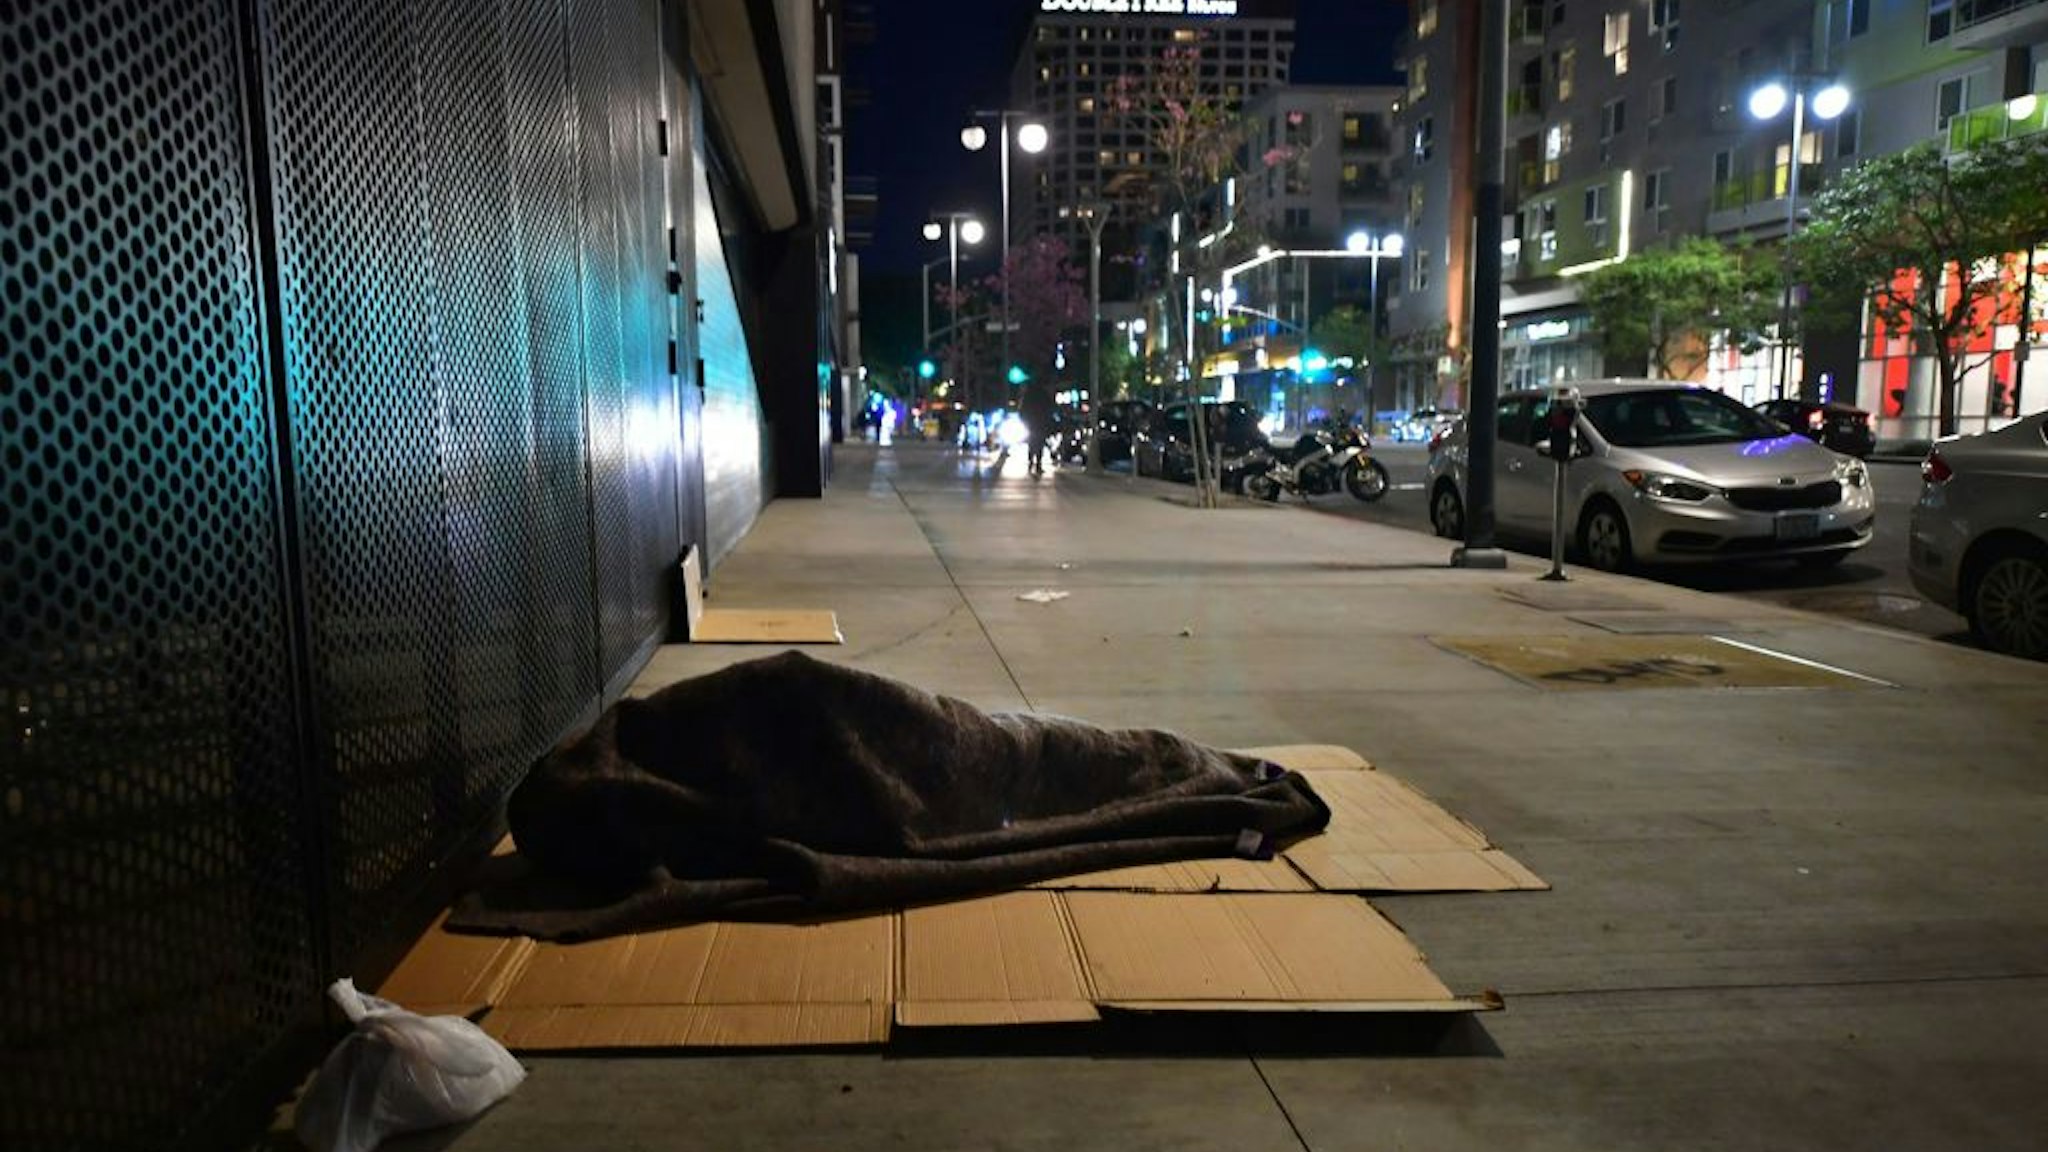 A homeless person sleeps covered with a blanket on cardboard in Los Angeles, California on February 24, 2022, as volunteers participate on the third night of the Greater Los Angeles Homeless Count on February 24, 2022 in Los Angeles, California.